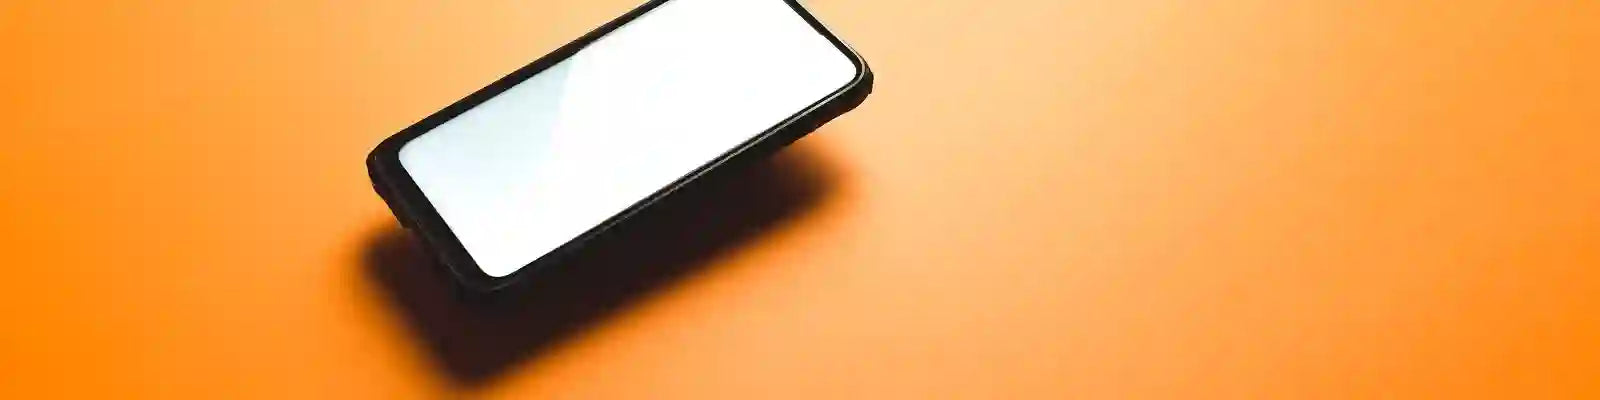 cellphone-levitates-above-an-orange-background Collection Image SA Lot